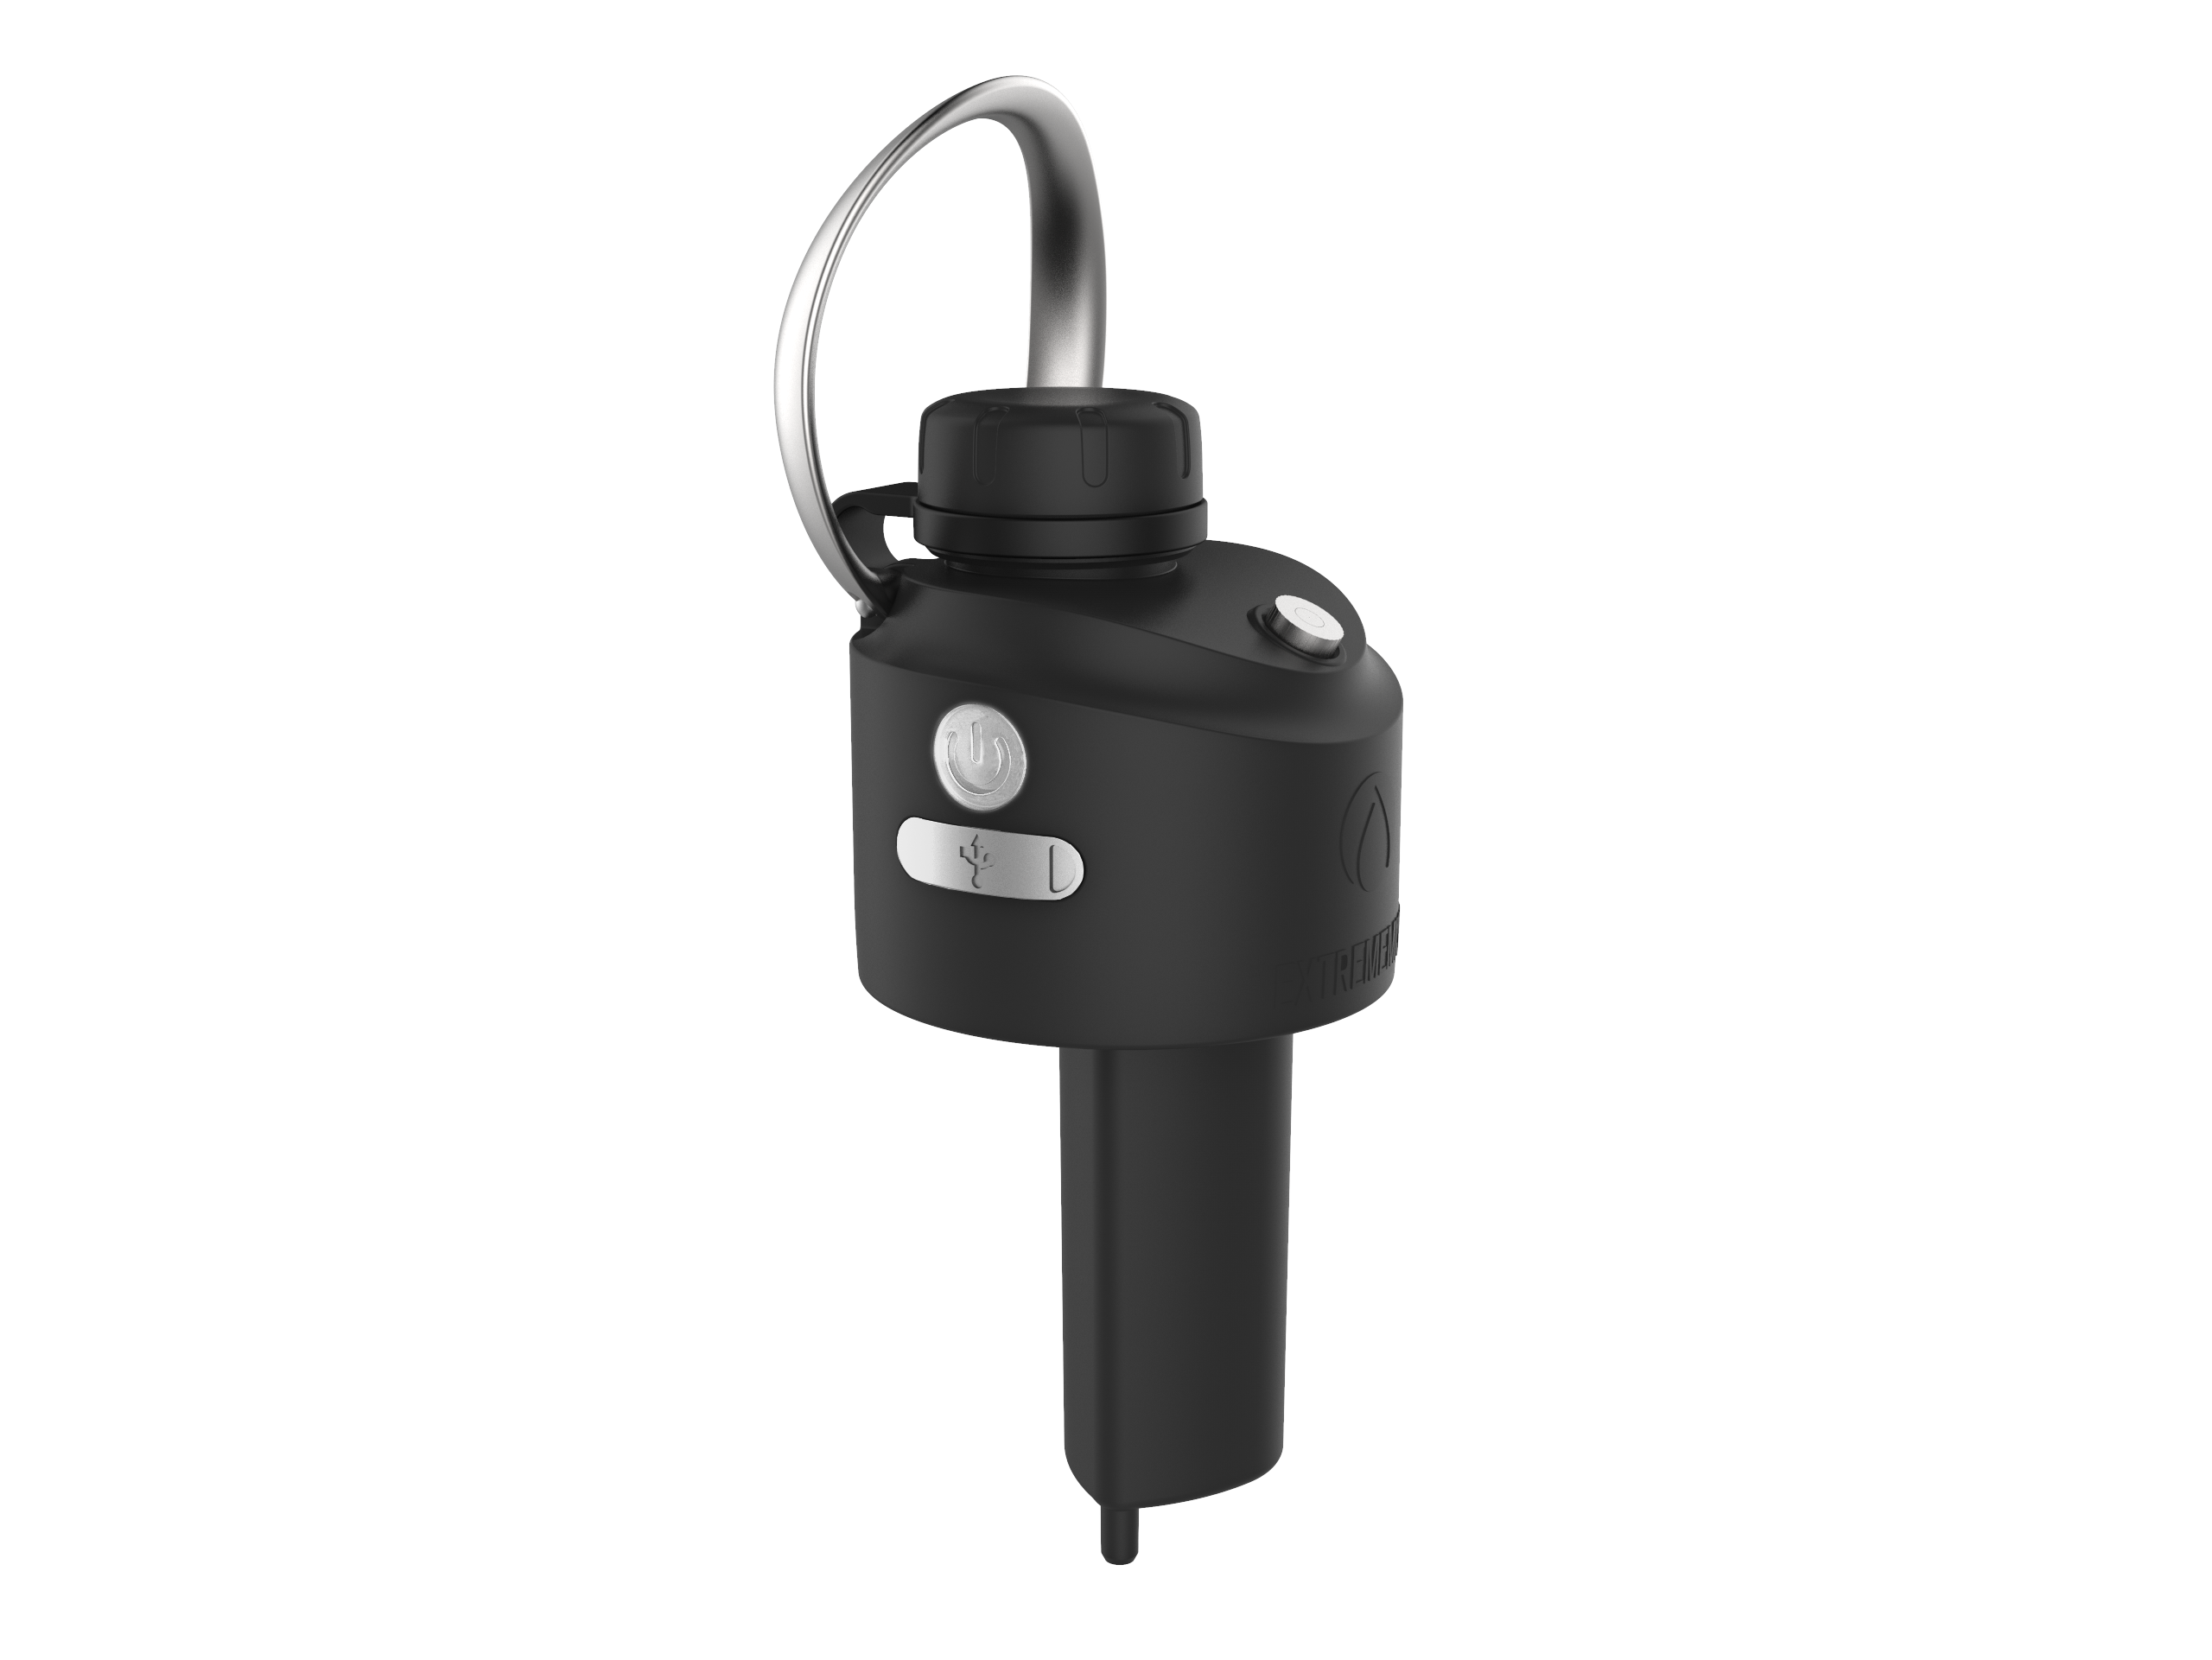 gomist misting water bottle cap with integrated handle raised